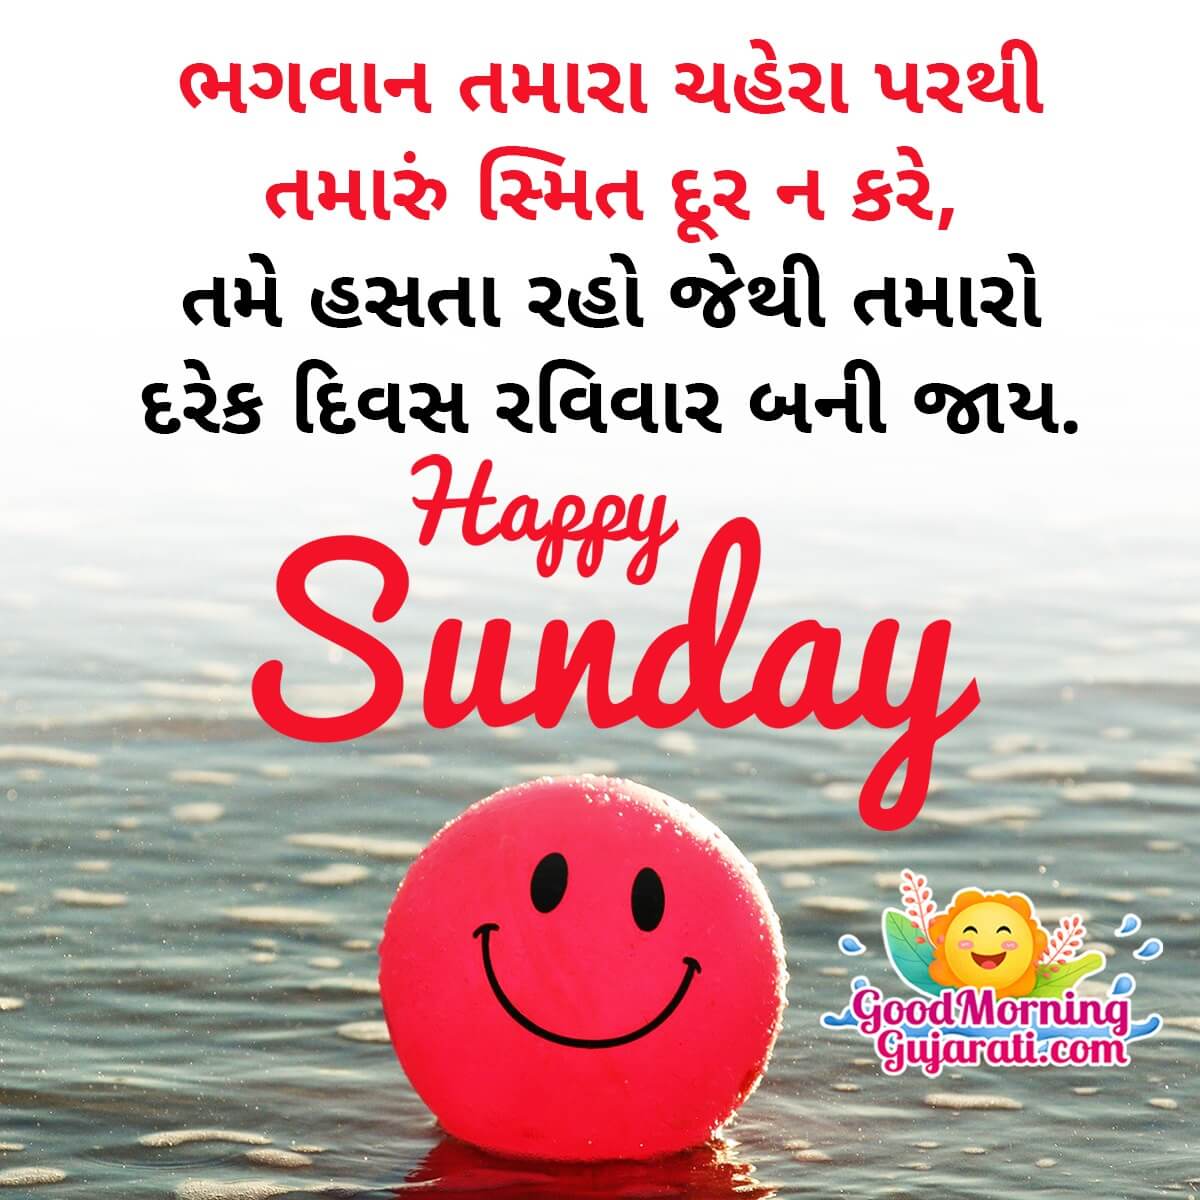 Good Morning Sunday Messages In Gujarati